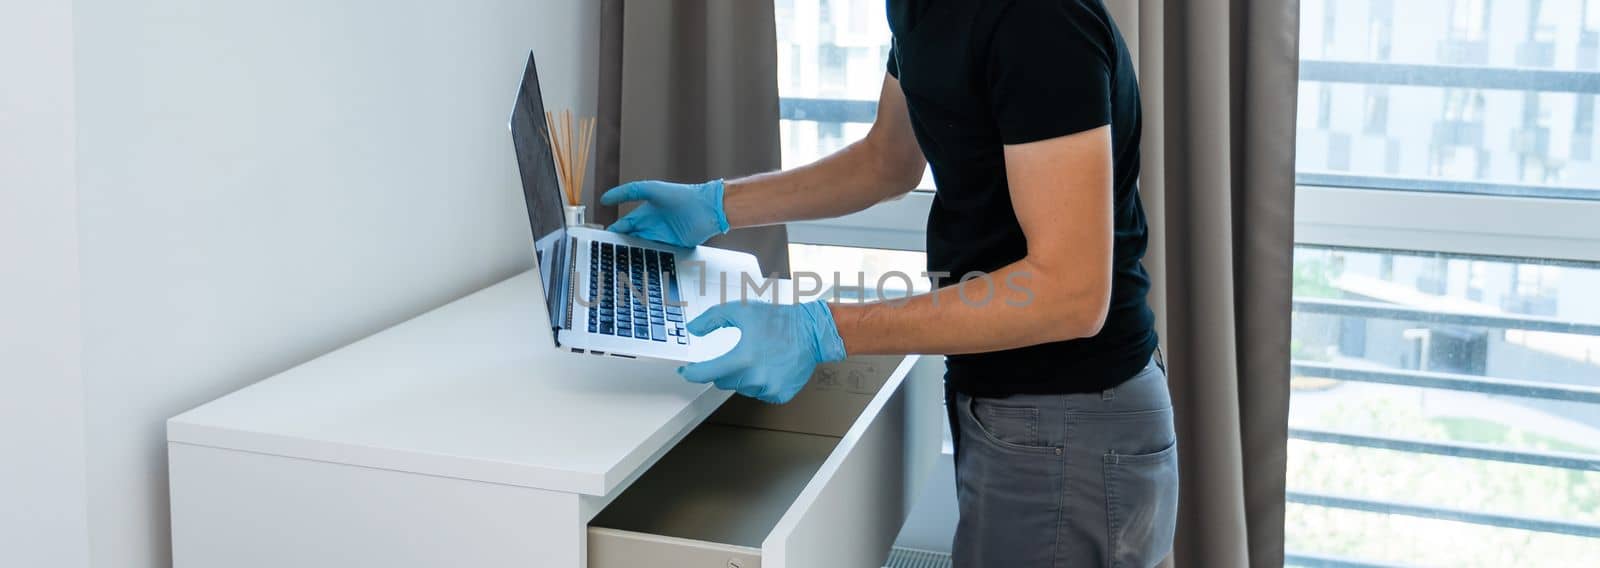 Thief with black balaclava stealing laptop. The burglar commits a crime in Luxury apartment.